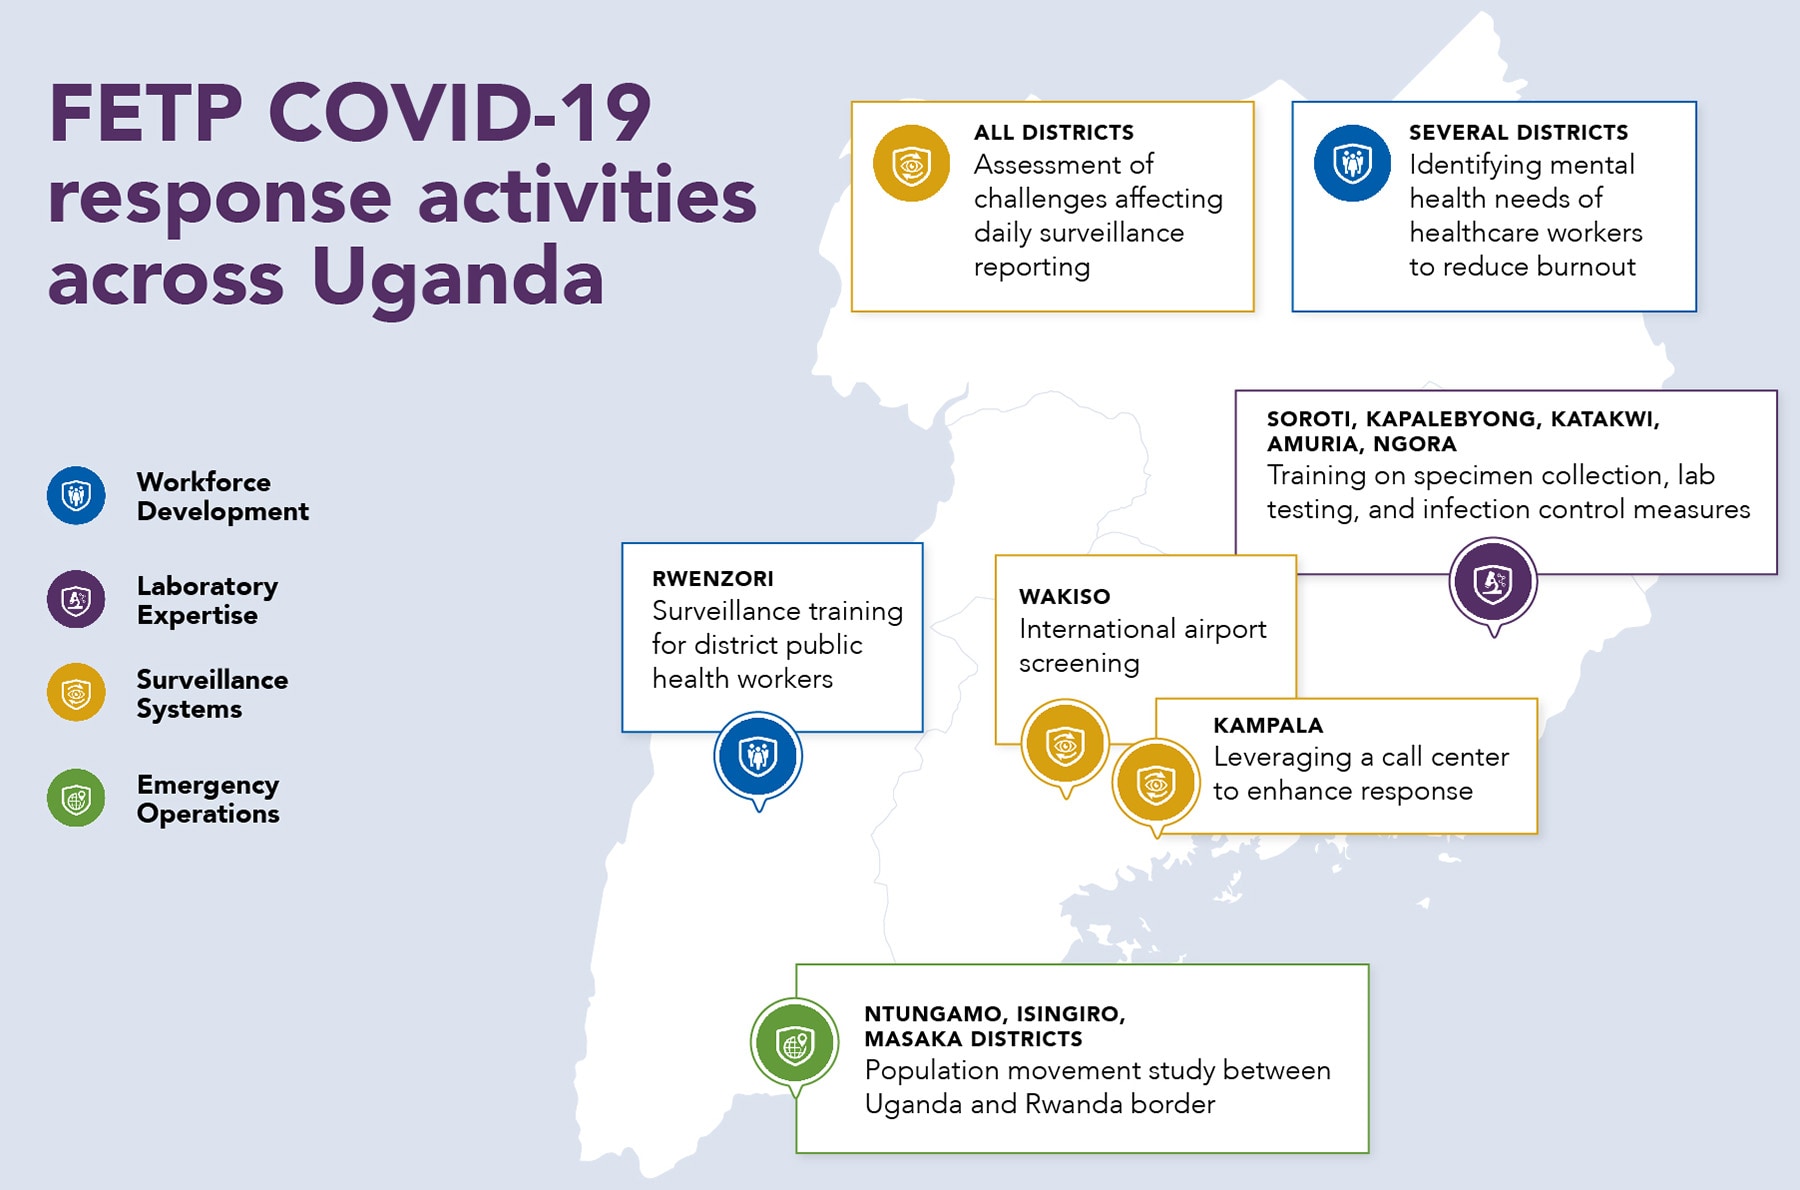 FETP COVID-19 response activities across Uganda. Map of Uganda showing response activities in four categories. 1) Workforce Development: Several Districts: Identifying mental health needs of healthcare workers to reduce burnout; Rwenzori: Surveillance training for district public health workers. 2) Laboratory Expertise: Soroti, Kapalebyong, Katakwi, Amuria, Ngora: Training on specimen collection, lab testing, and infection control measures. 3) Surveillance Systems: All Districts: Assessment of challenges affecting daily surveillance reporting; Wakiso: International airport screening; Kampala: Leveraging a call center to enhance response. 4) Emergency Operations: Ntungamo, Isingiro, Makasa Districts: Population movement study between Uganda and Rwanda border.